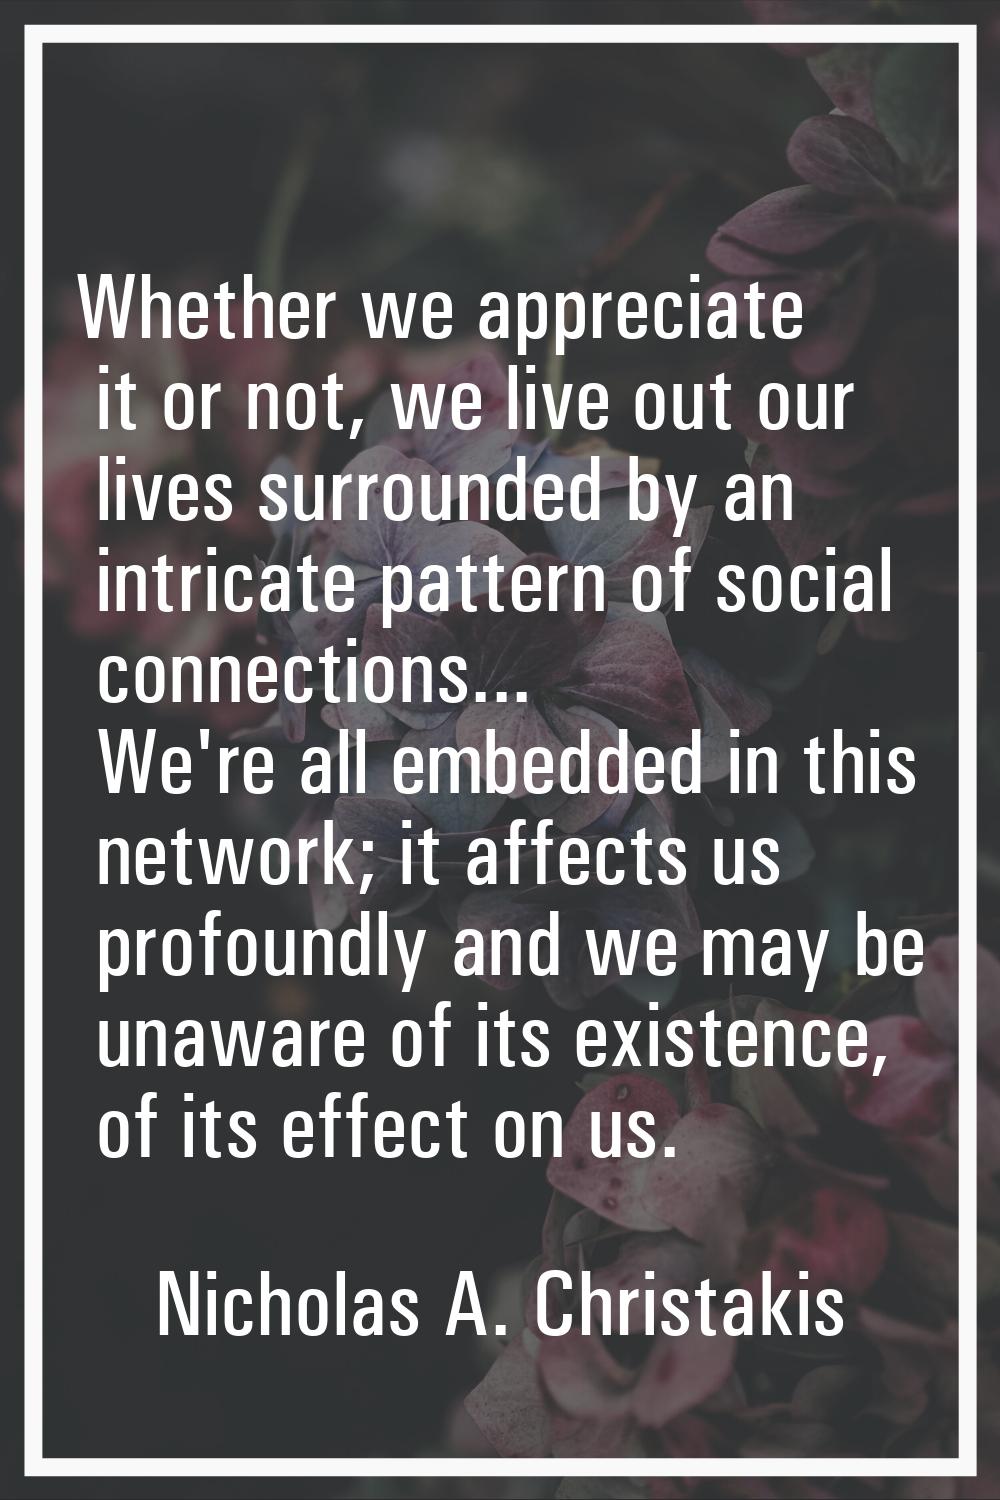 Whether we appreciate it or not, we live out our lives surrounded by an intricate pattern of social